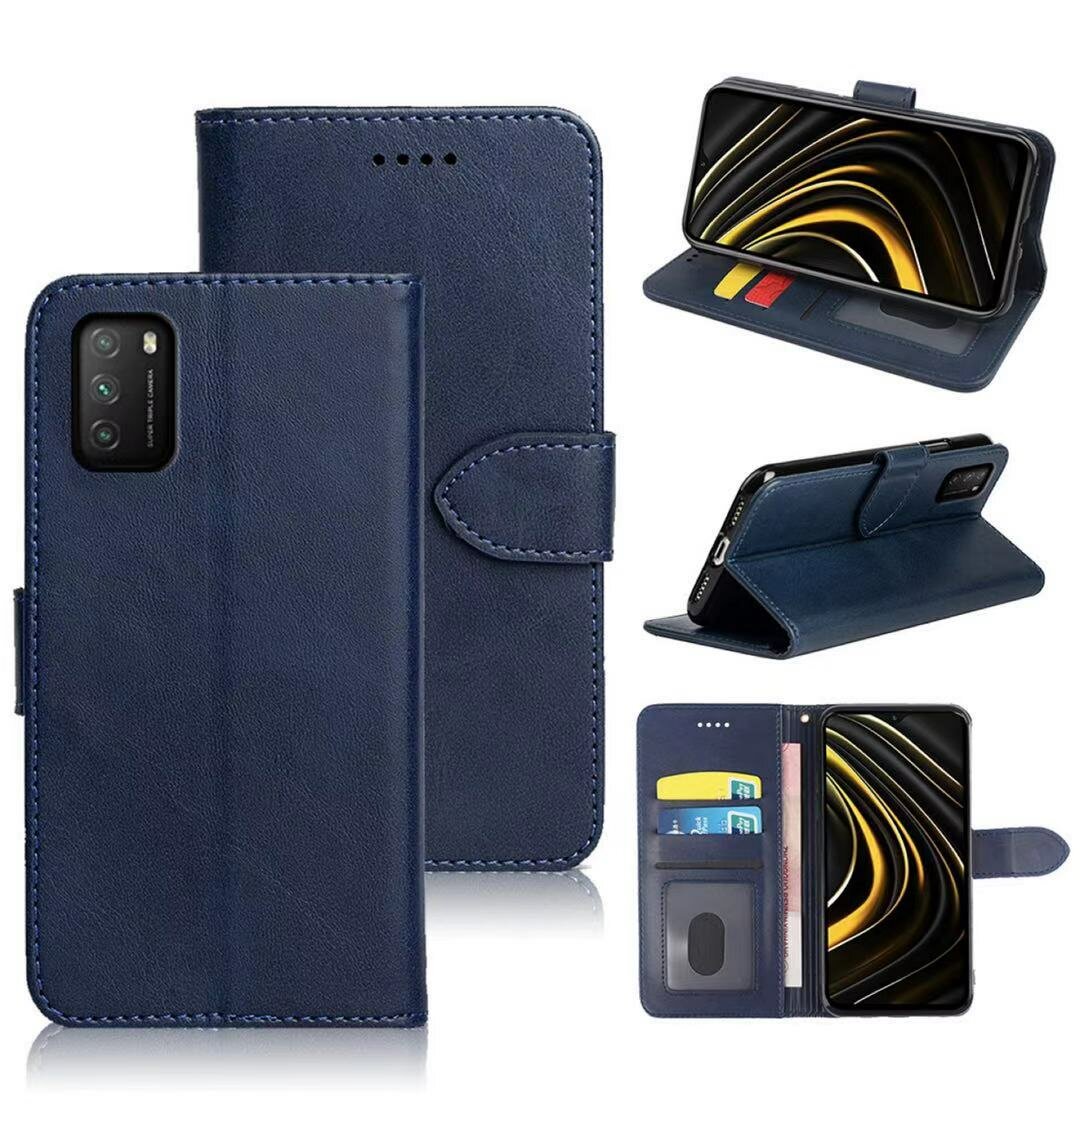 Bakeey for POCO M3 Case Magnetic Flip with Multi Card Slots Wallet Stand PU Leather Full Body Cover Protective Cover  - buy with discount